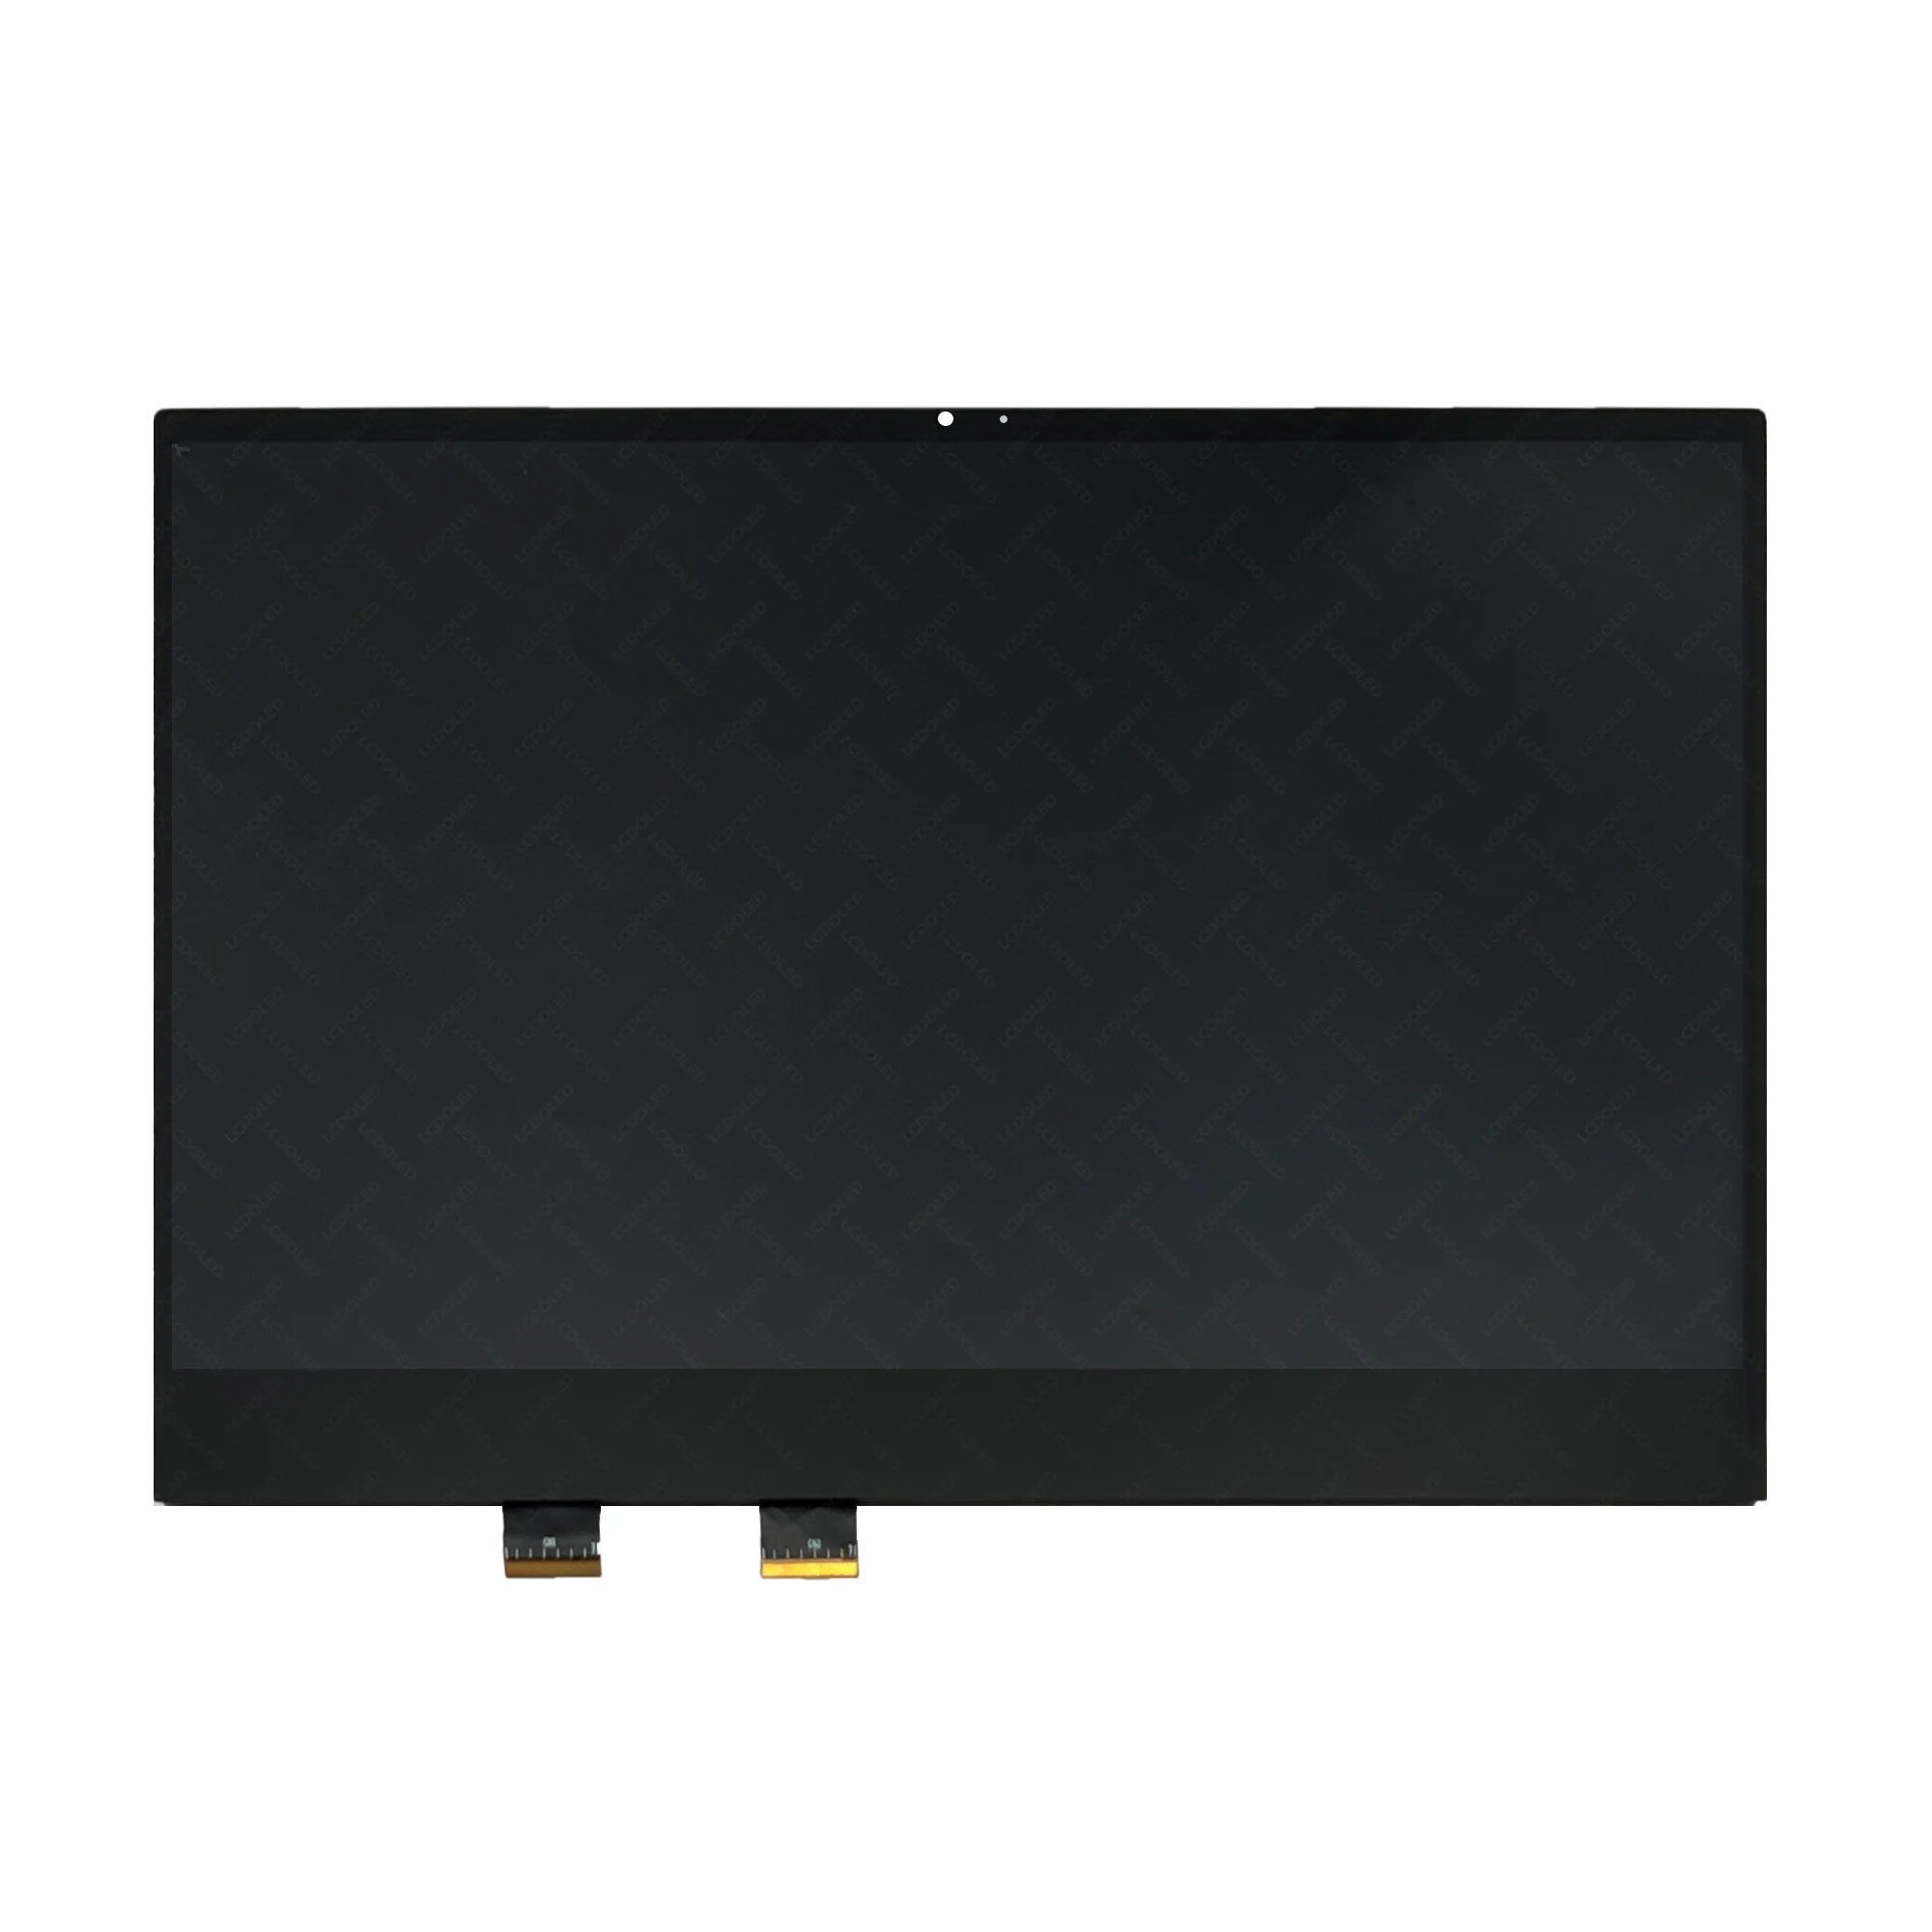 

for HP ENVY 15-ep0151TX 15-ep0140TX 15-ep0055TX 15.6" FHD LED LCD Touch Screen IPS Display Panel Assembly 1920X1080 30 Pins 60hz